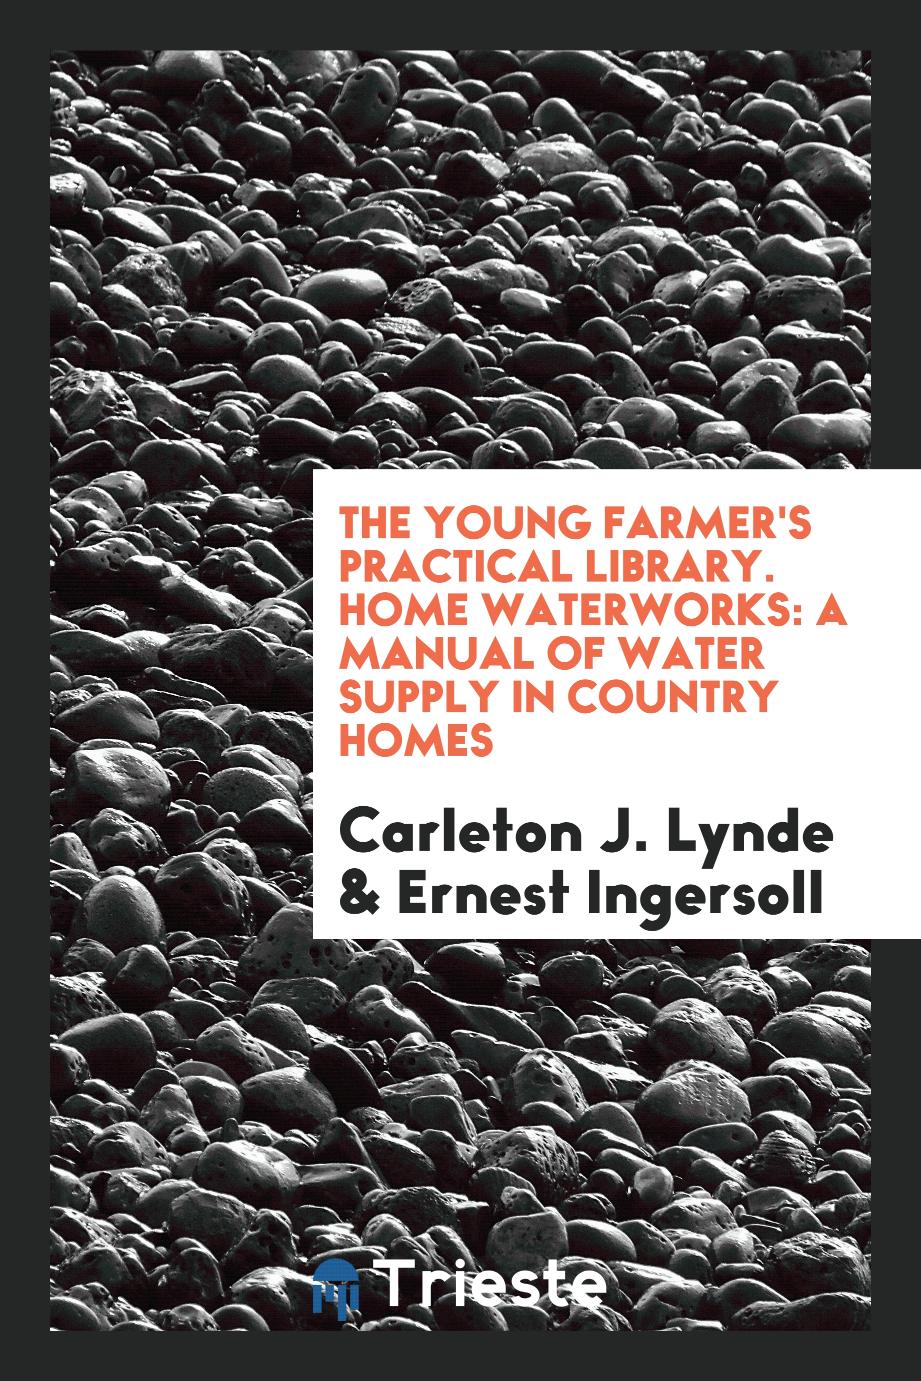 The Young Farmer's Practical Library. Home Waterworks: A Manual of Water Supply in Country Homes